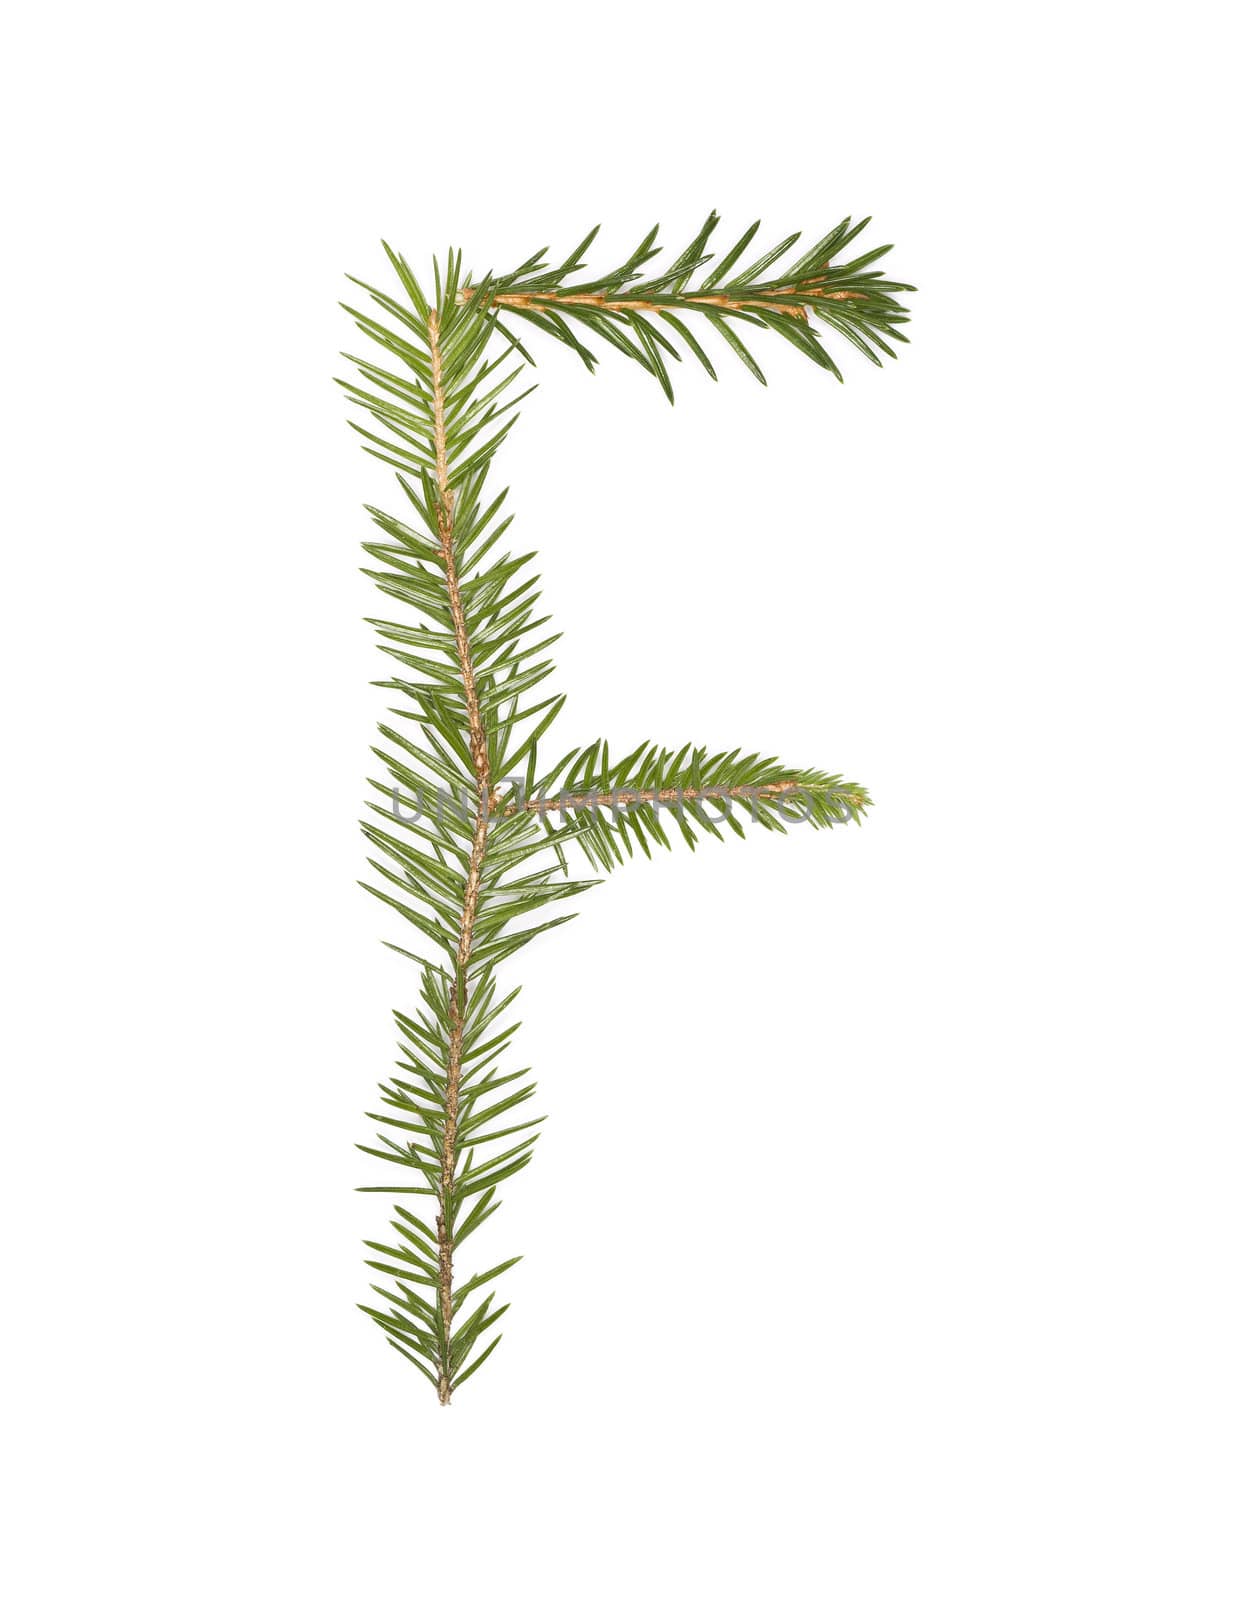 Spruce twigs forming the letter 'F' isolated on white